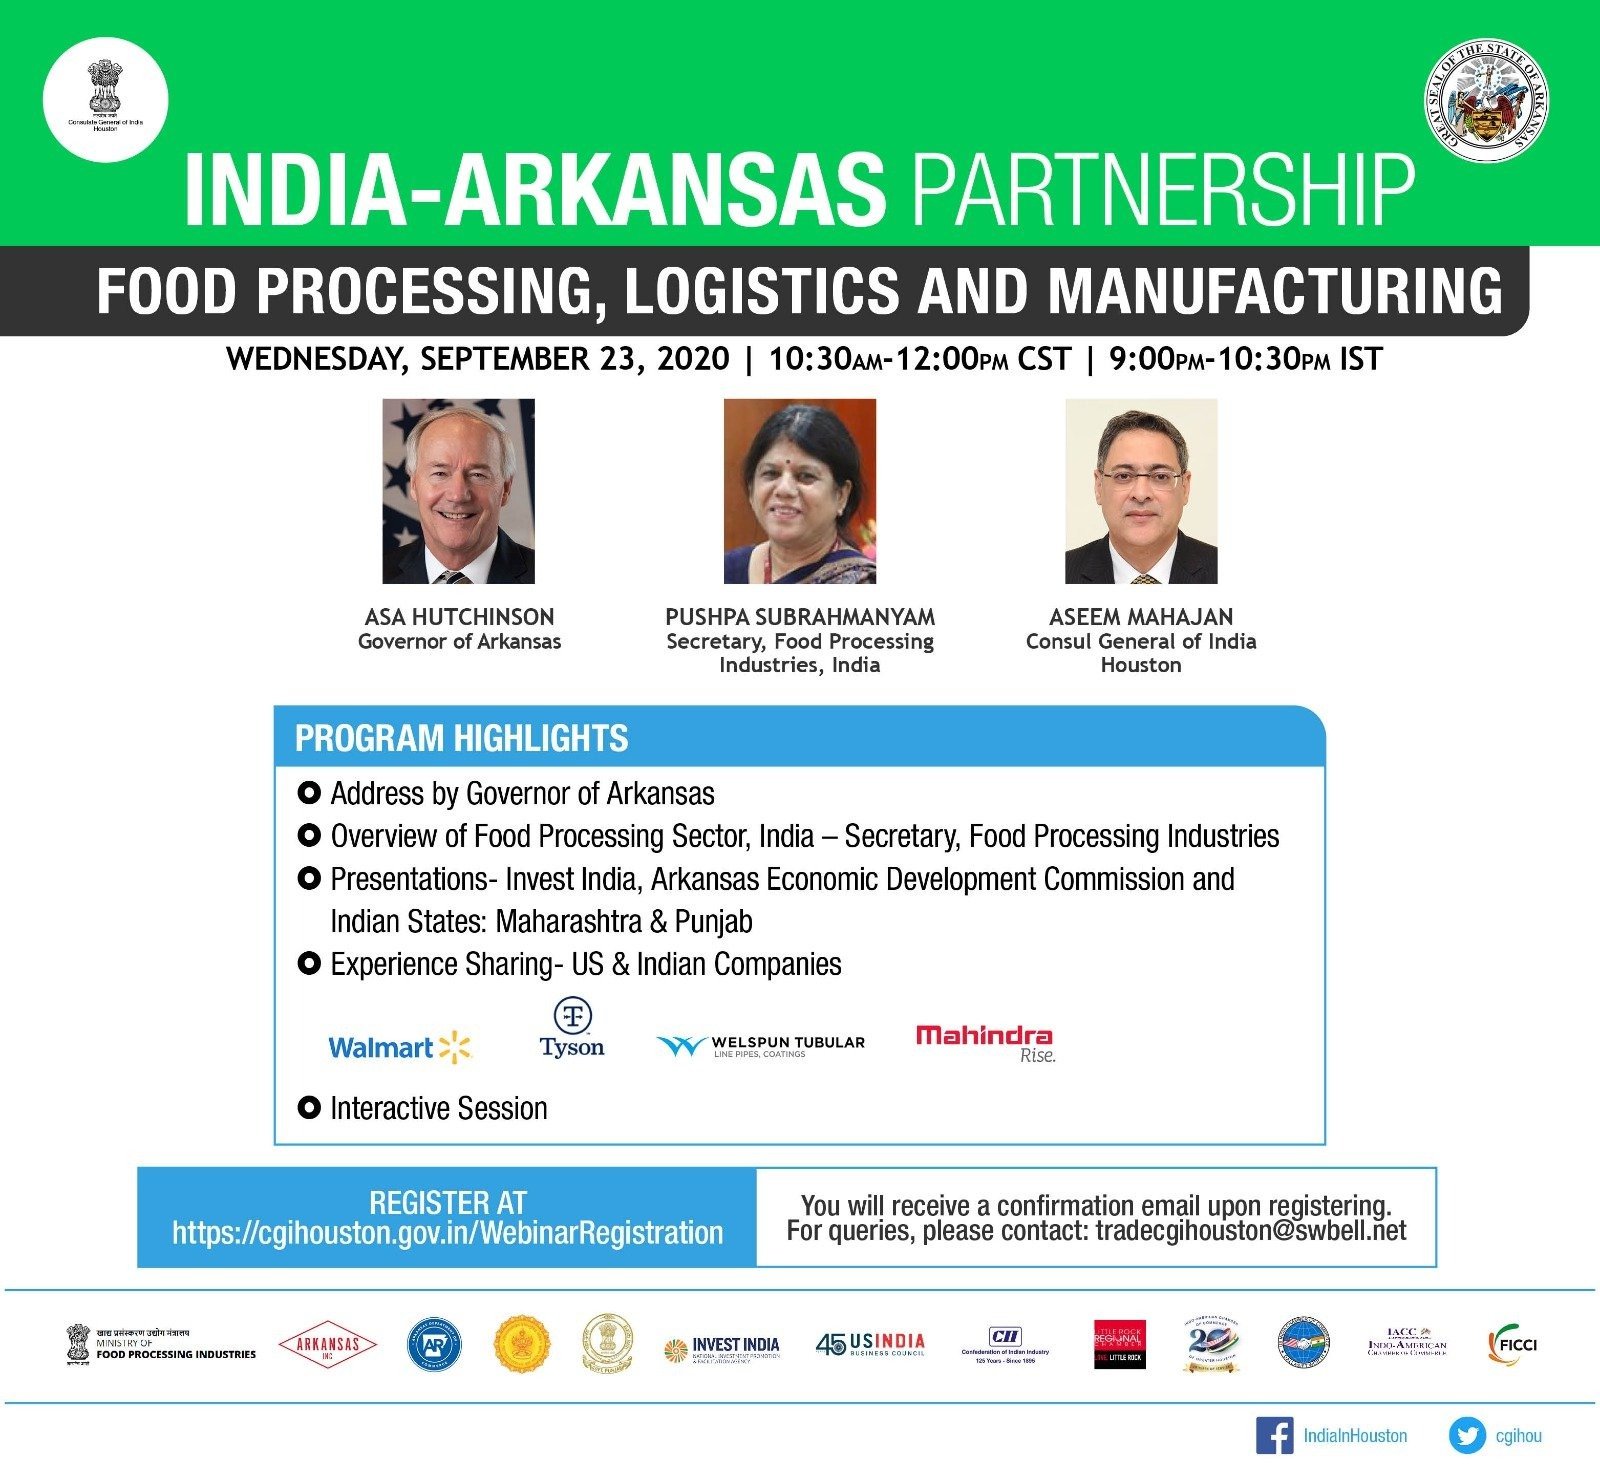 Consulate General of India, Houston Organized a webinar "India-Arkansas Partnership:Food Processing , Logistics and Manufacturing" along with various partners on September 23, 2020